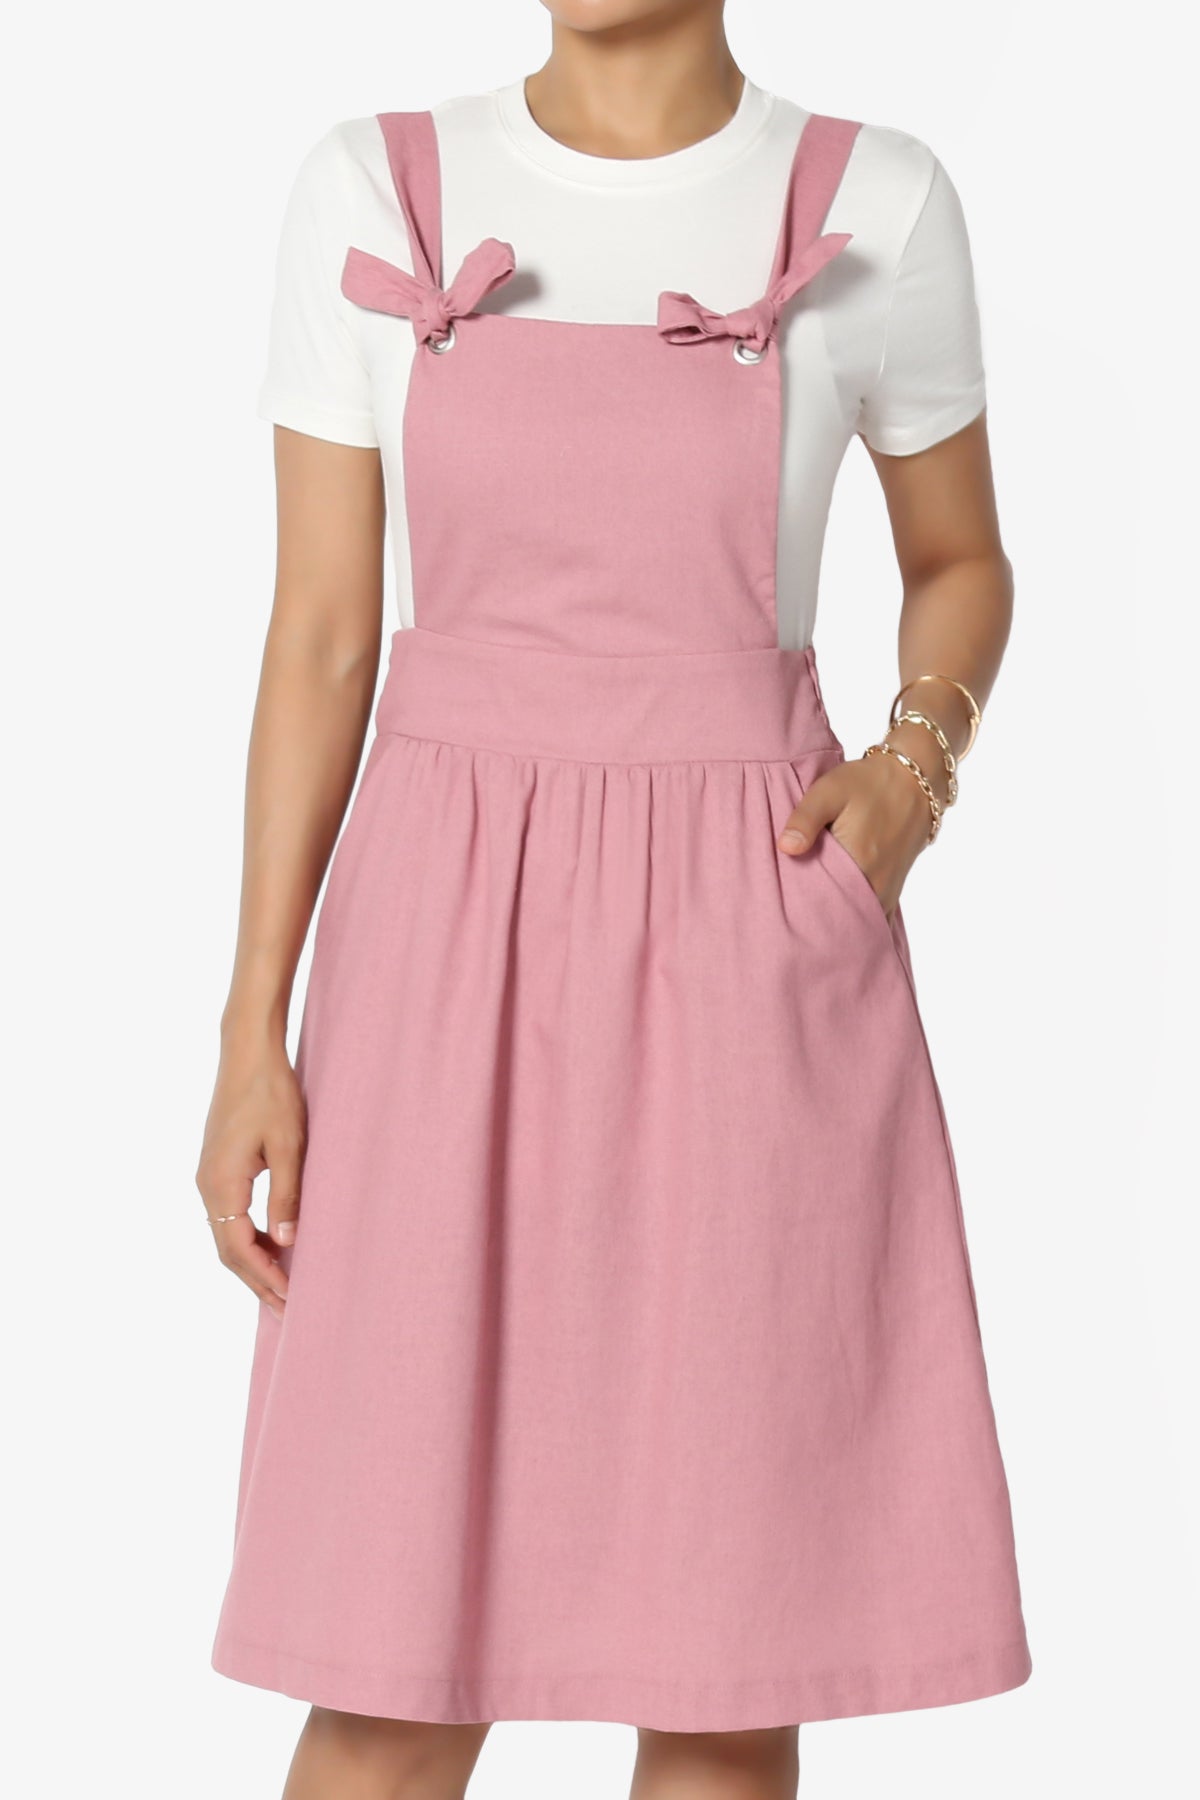 Load image into Gallery viewer, Titus Linen Suspender A-Line Skirt
